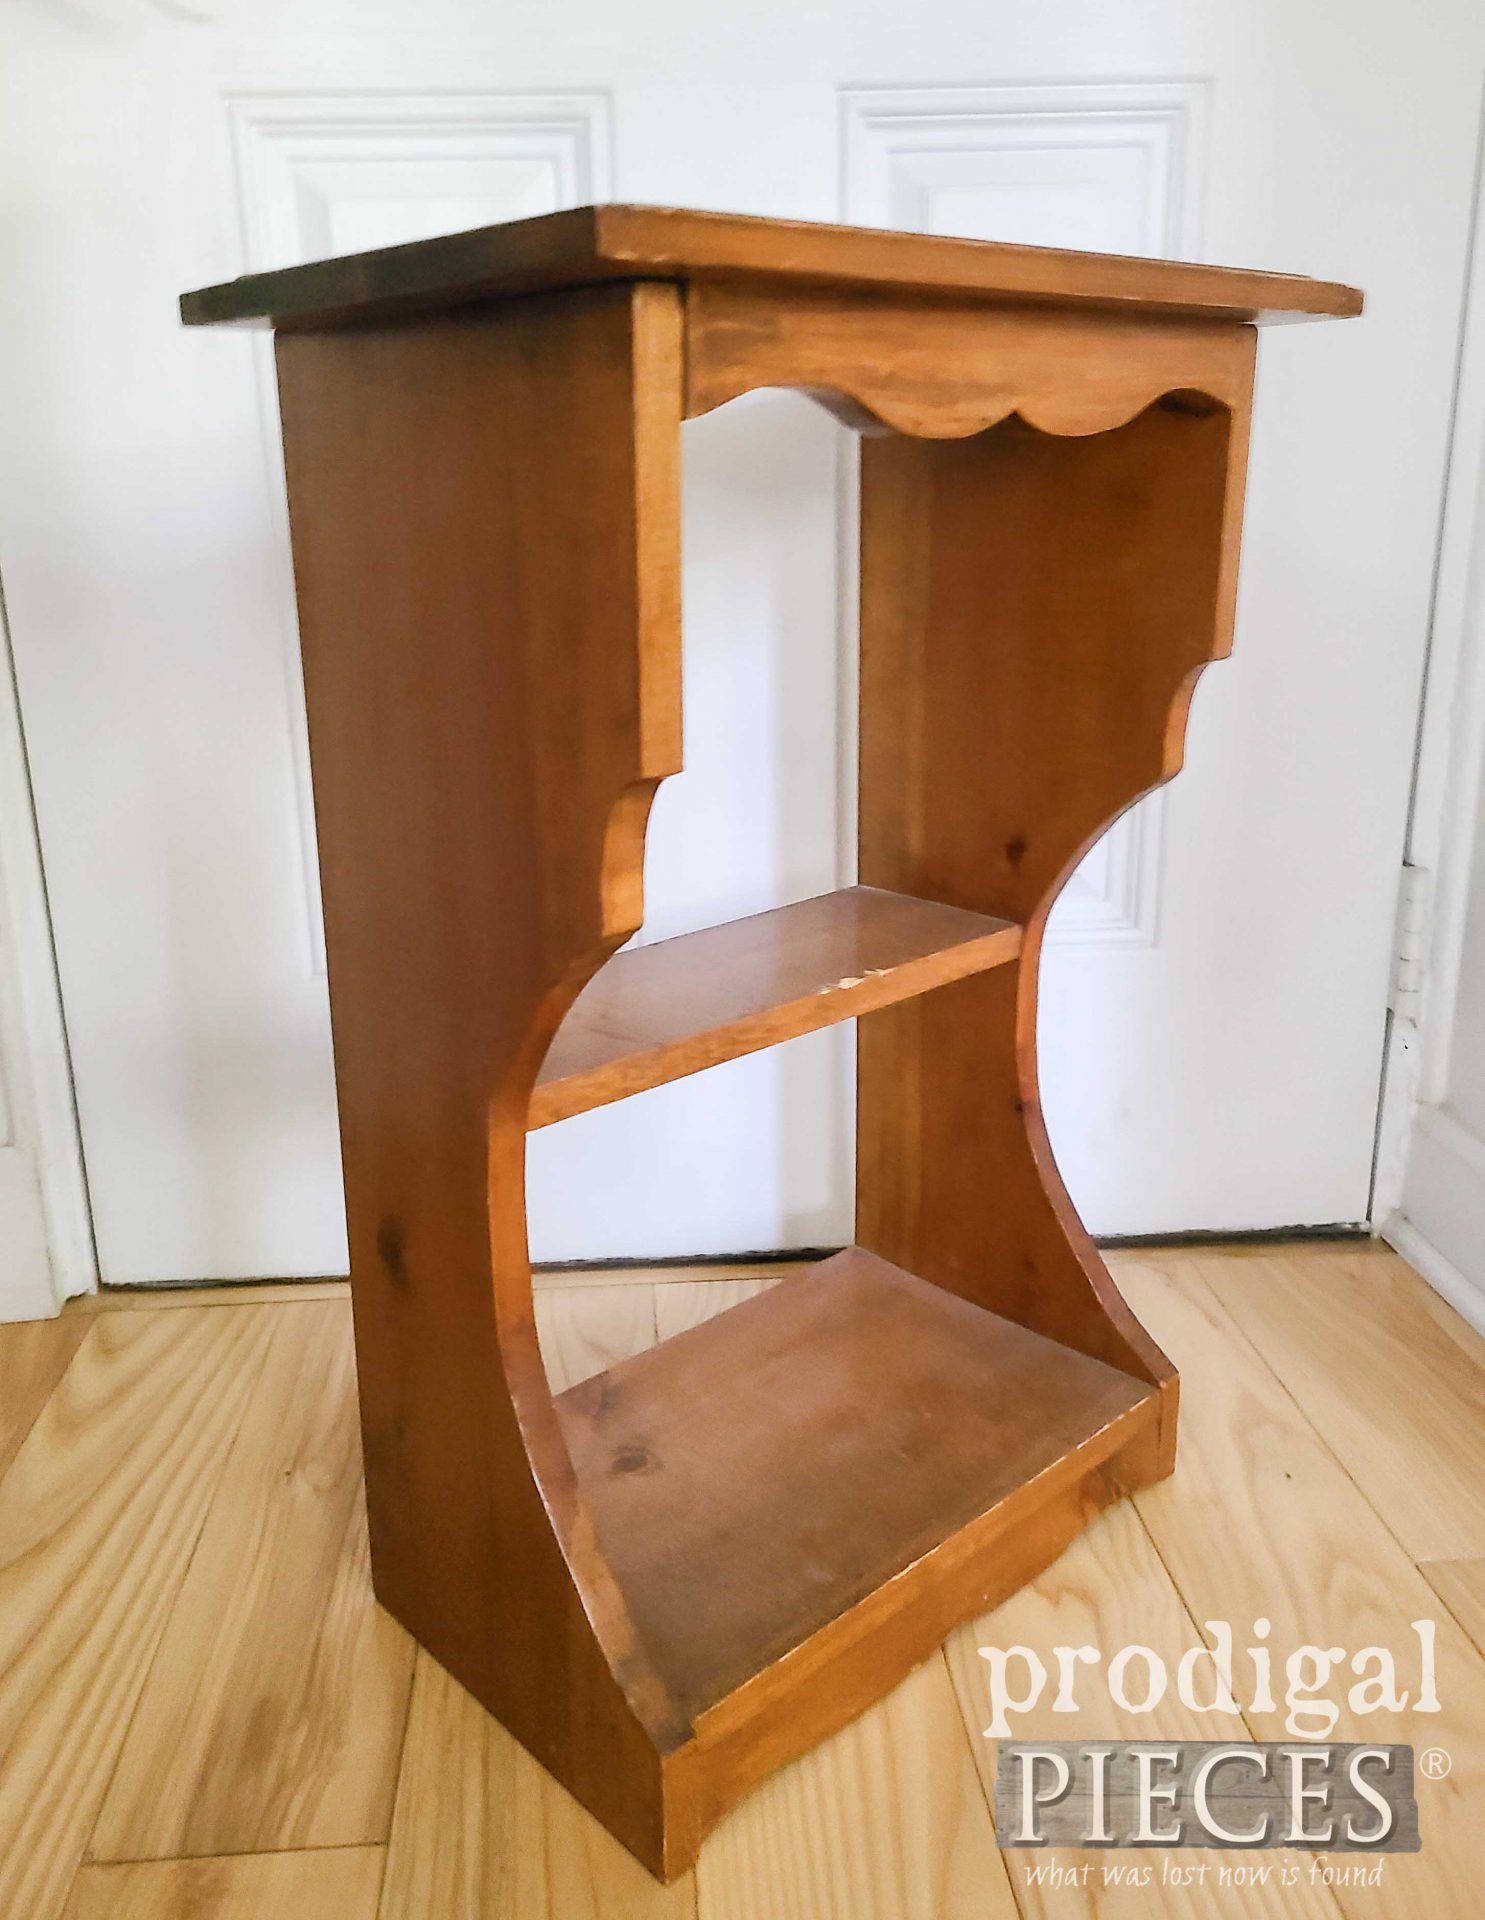 Side View of Wooden Shelf Updated | prodigalpieces.com #prodigalpieces